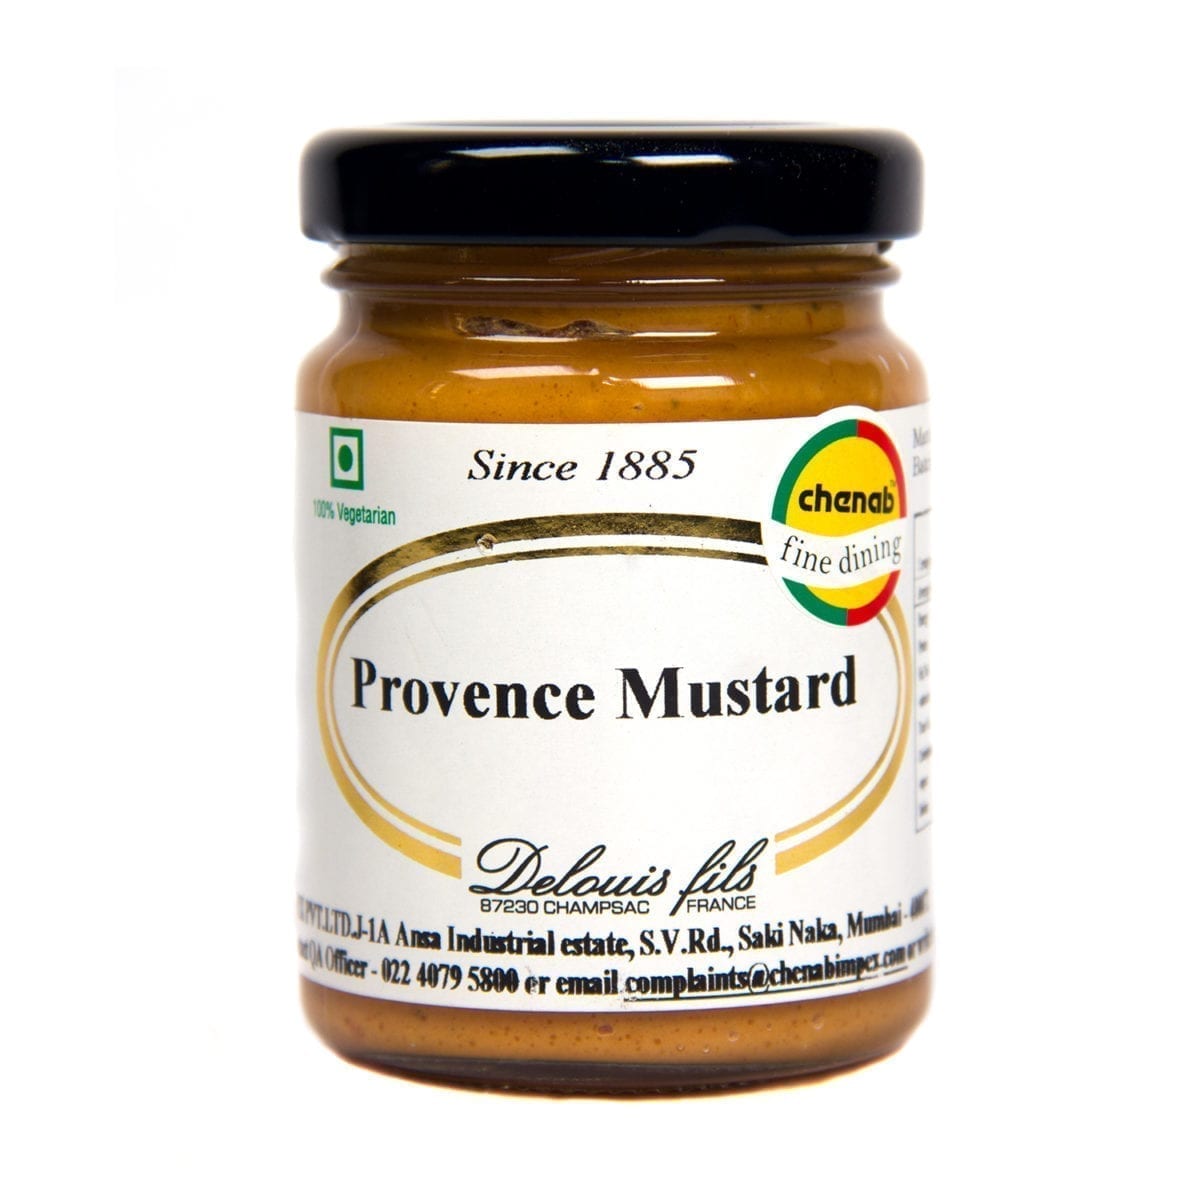 delouis-fils-french-provence-mustard-100gm-chenab-gourmet-food